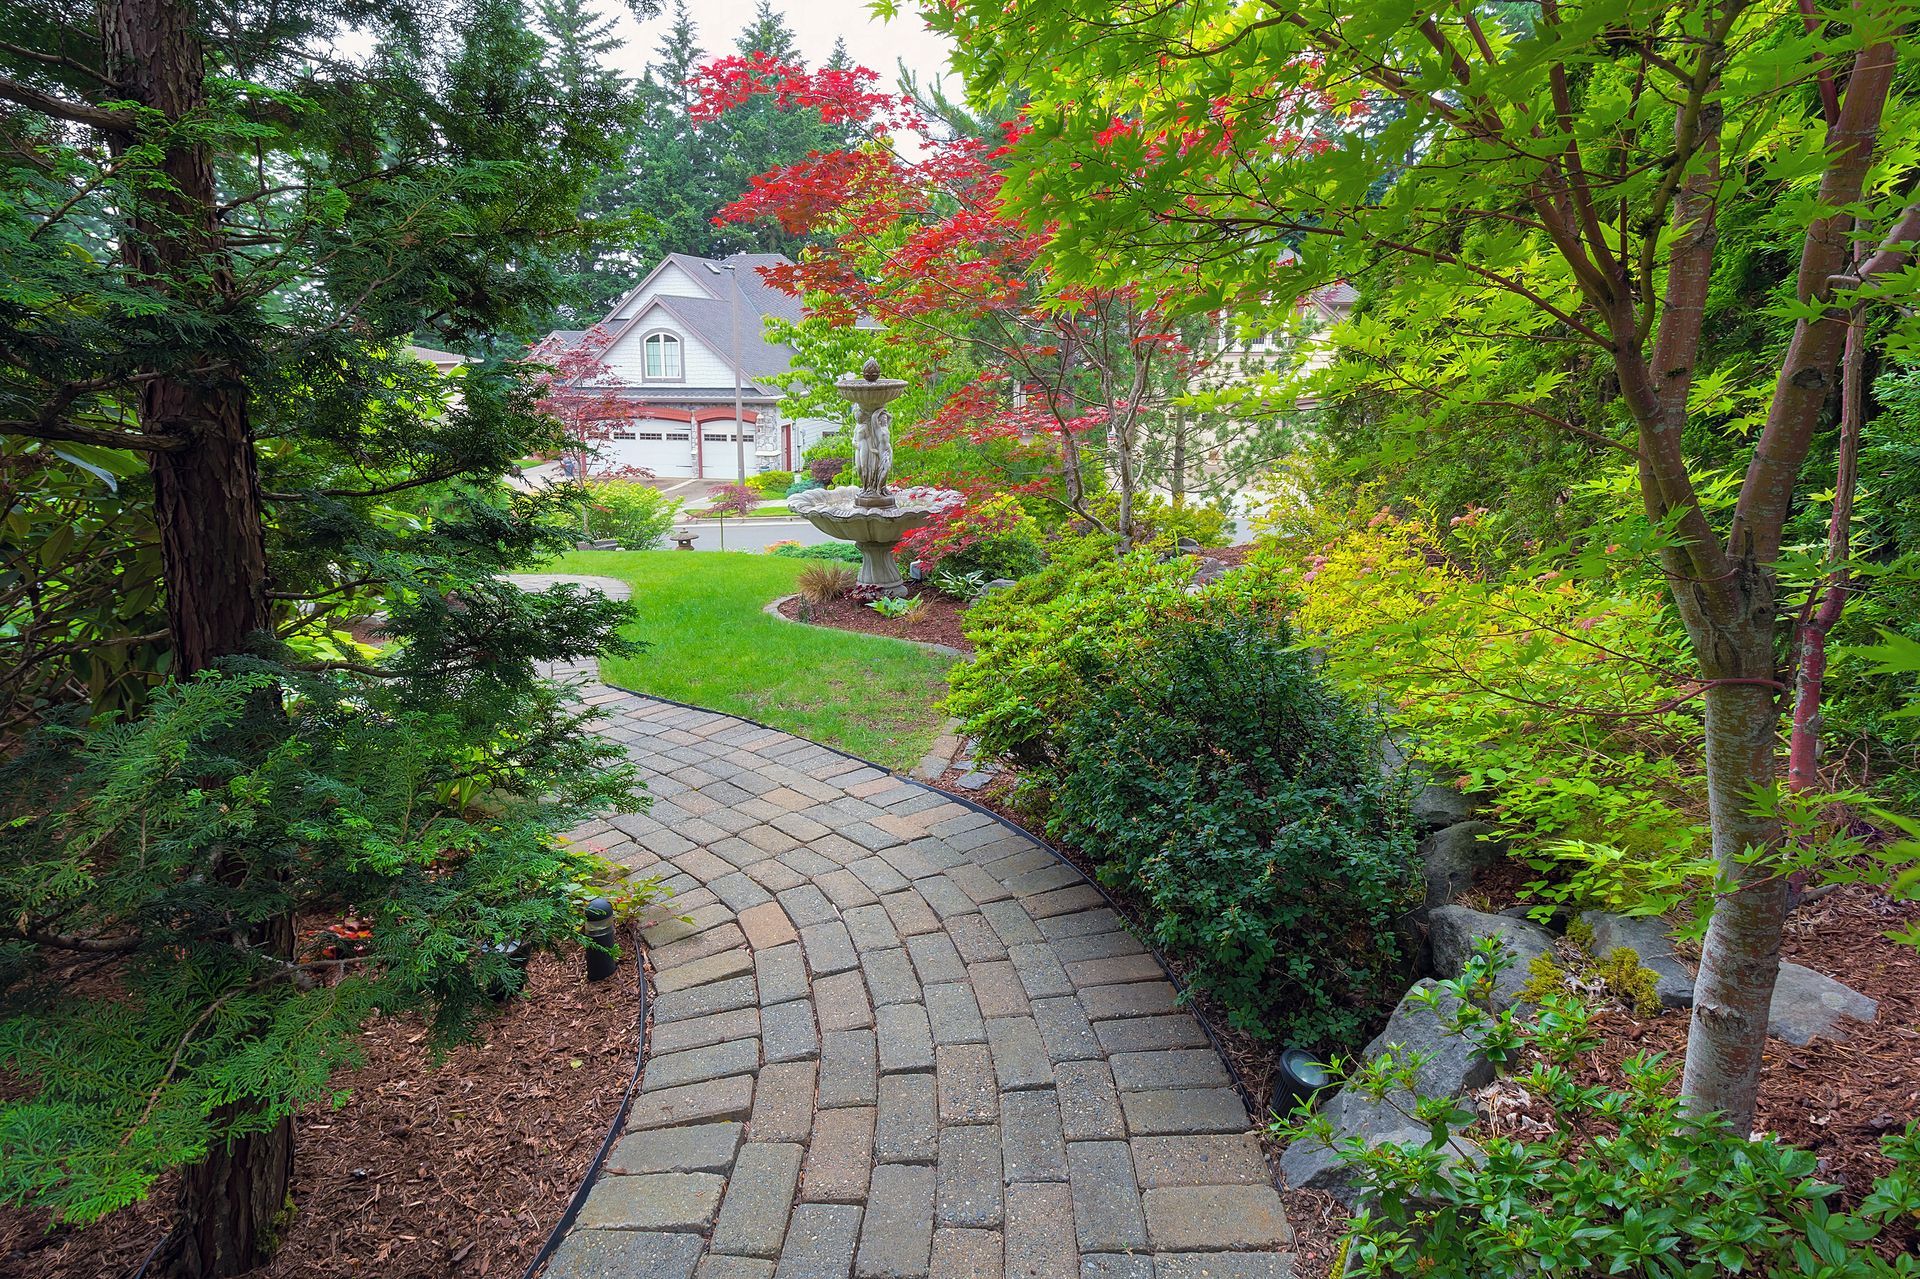 a brick walkway leads to a house surrounded by trees and bushes